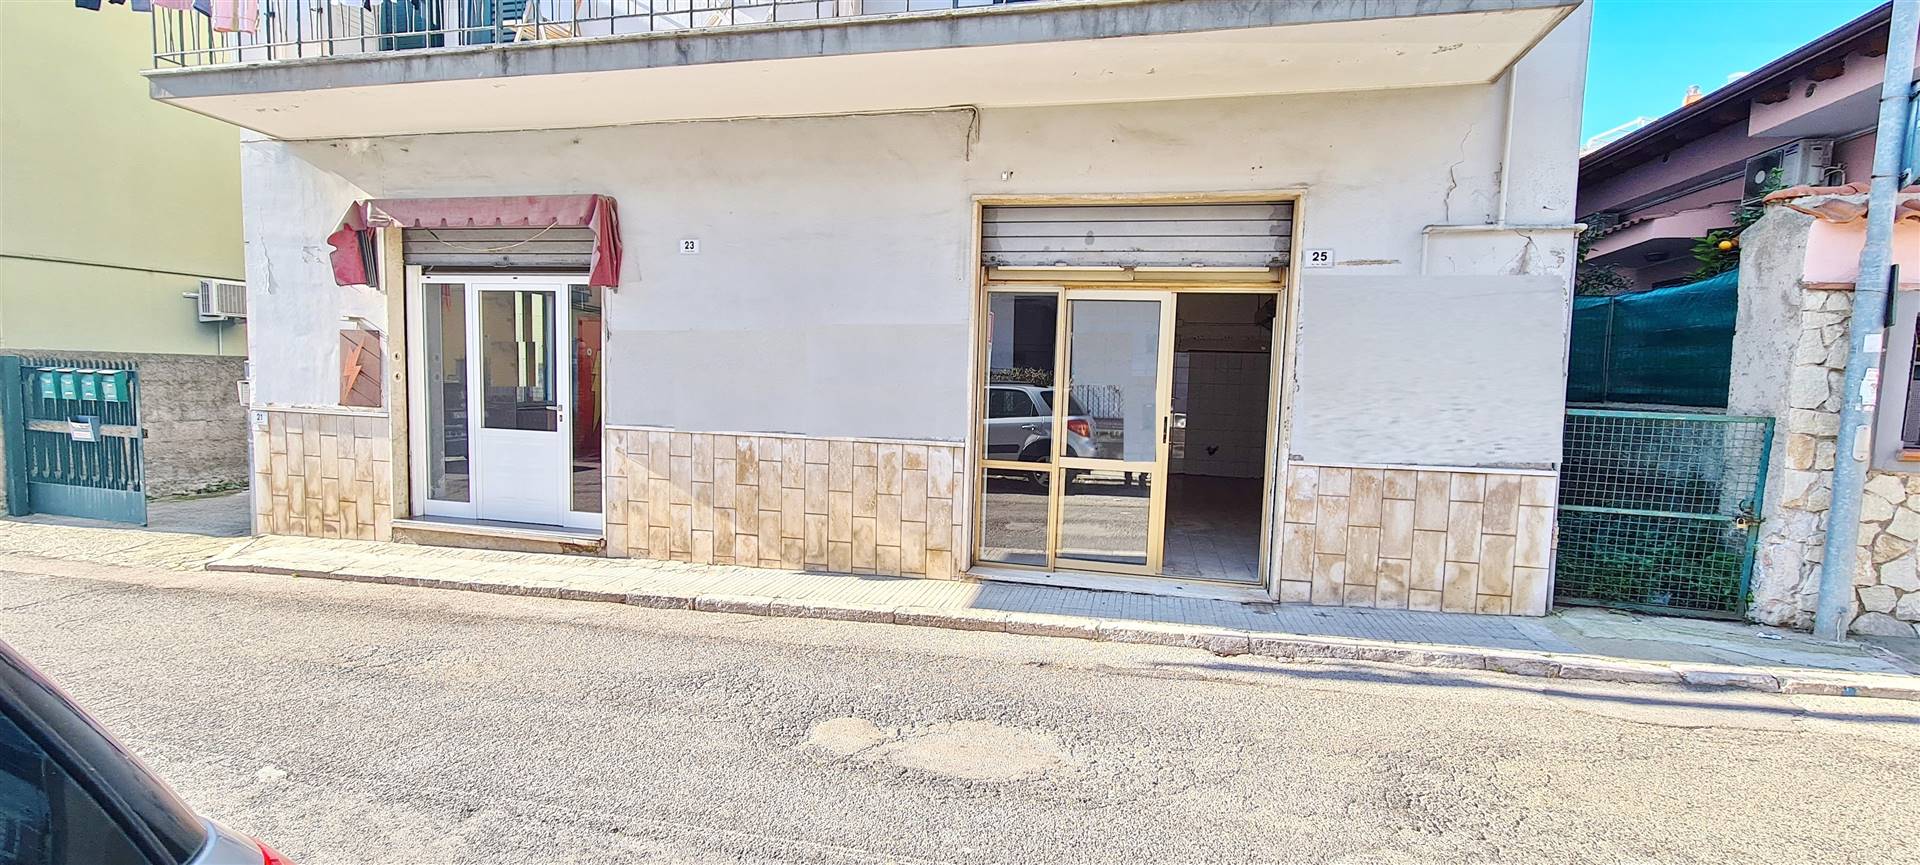 FORMIA, Garage / Parking space for rent of 37 Sq. mt., Good condition, Energetic class: G, placed at Ground, composed by: 1 Room, Double Box, Price: 